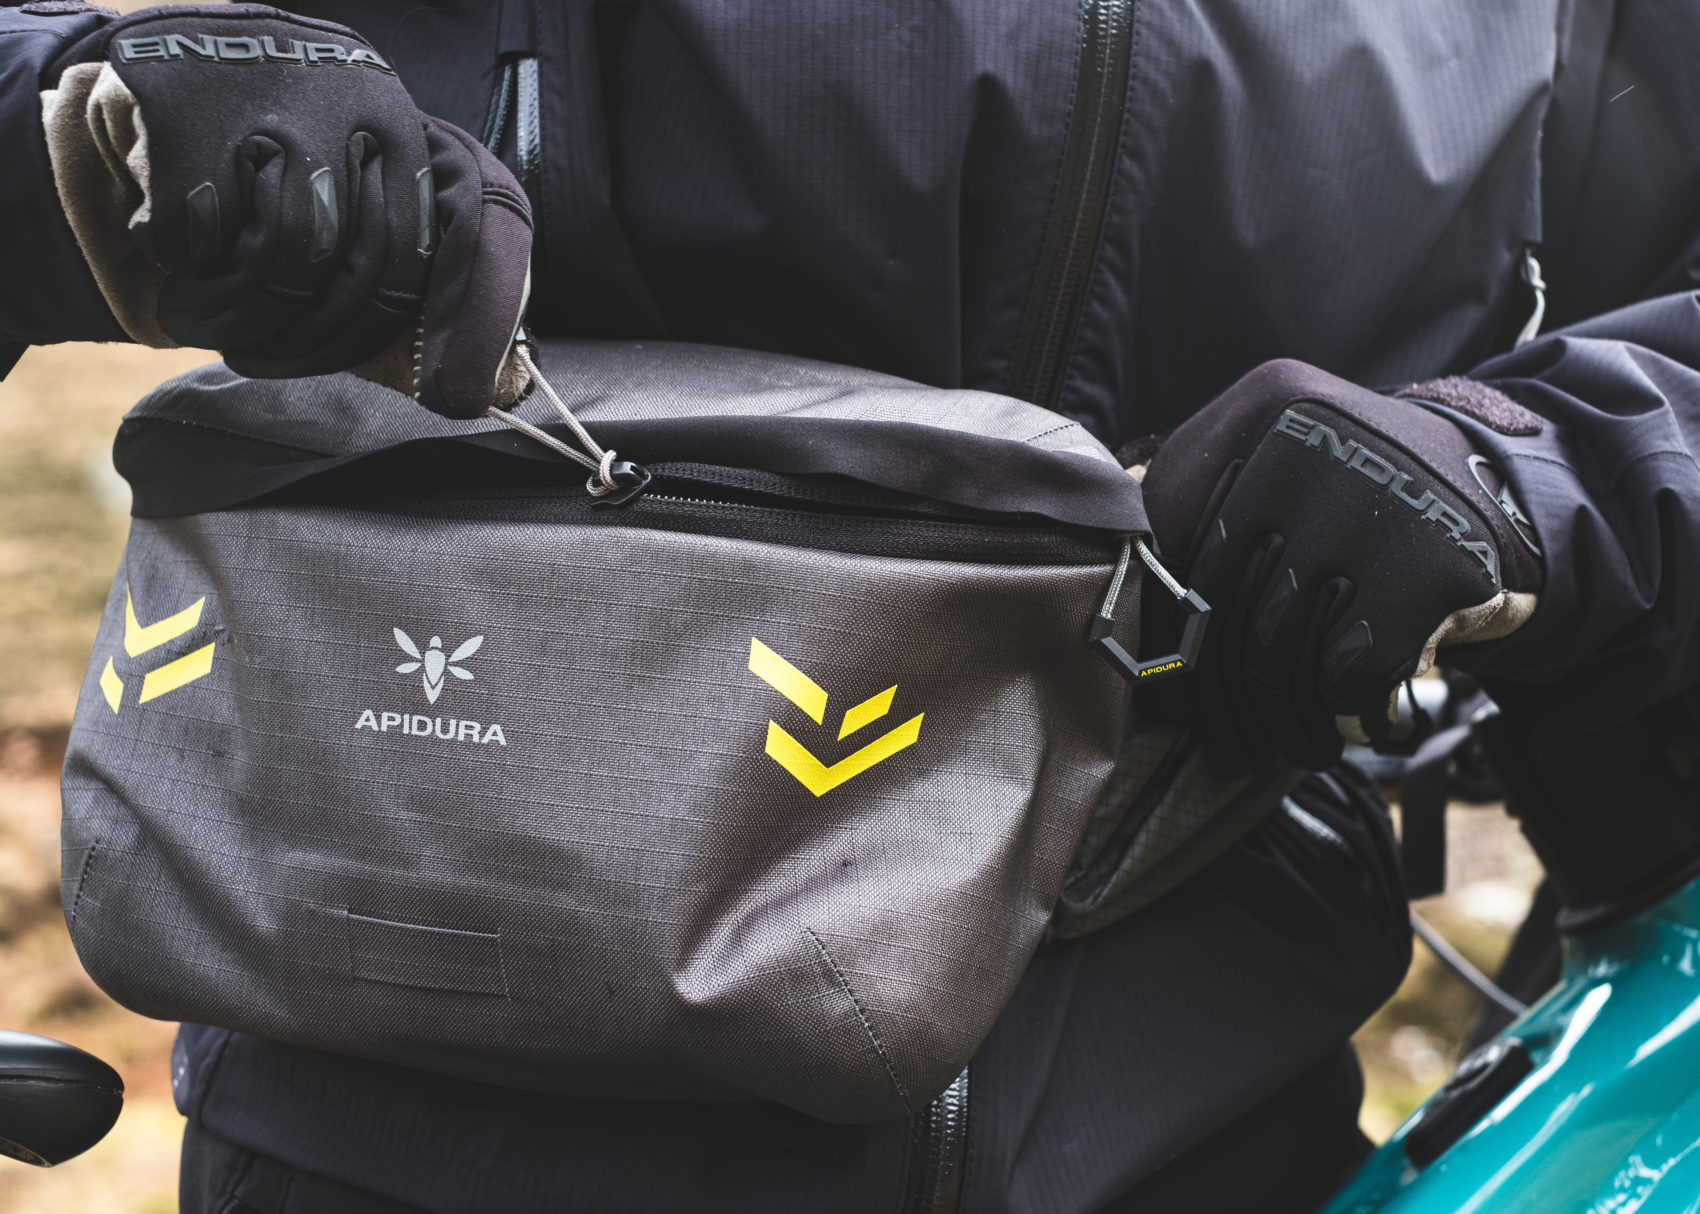 Apidura launches backcountry Hip Pack for technical riding